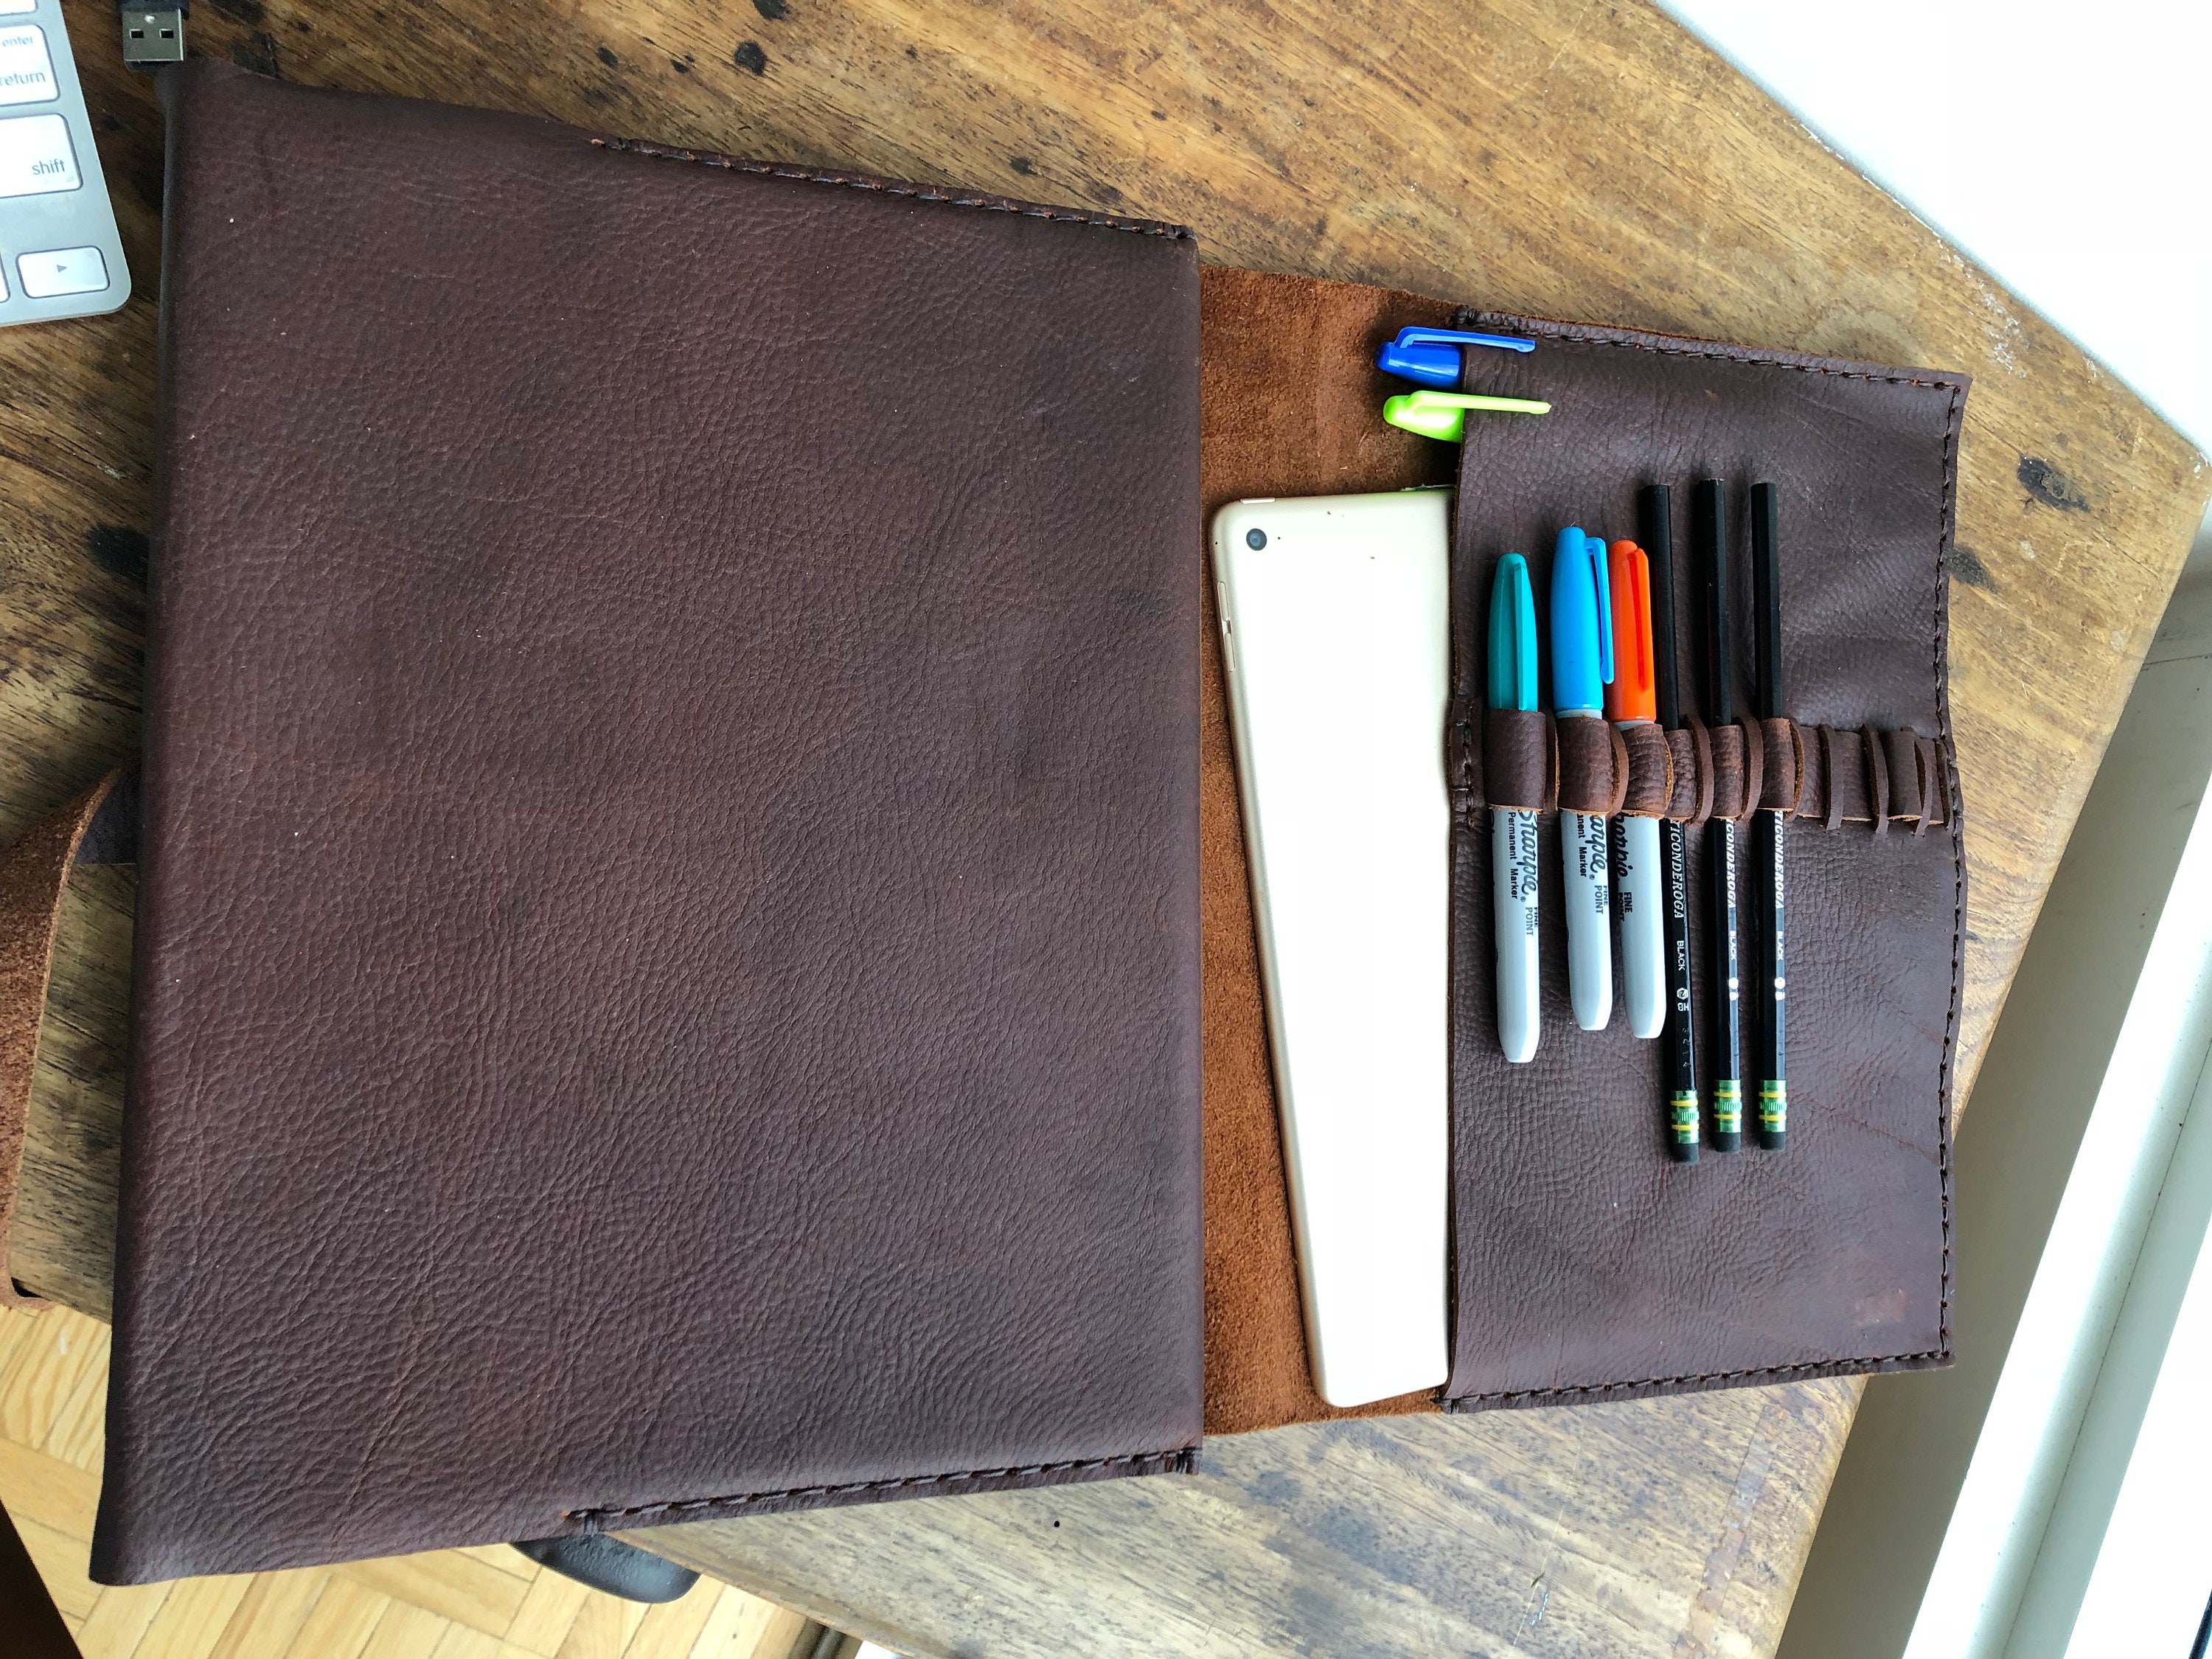 Buy Handmade Leather A5 Sketchbook Cover, Vertical and Horizontal Sketch  Book, Refillable Leather Sketchbook, Leather Bound Sketchbook Online in  India 